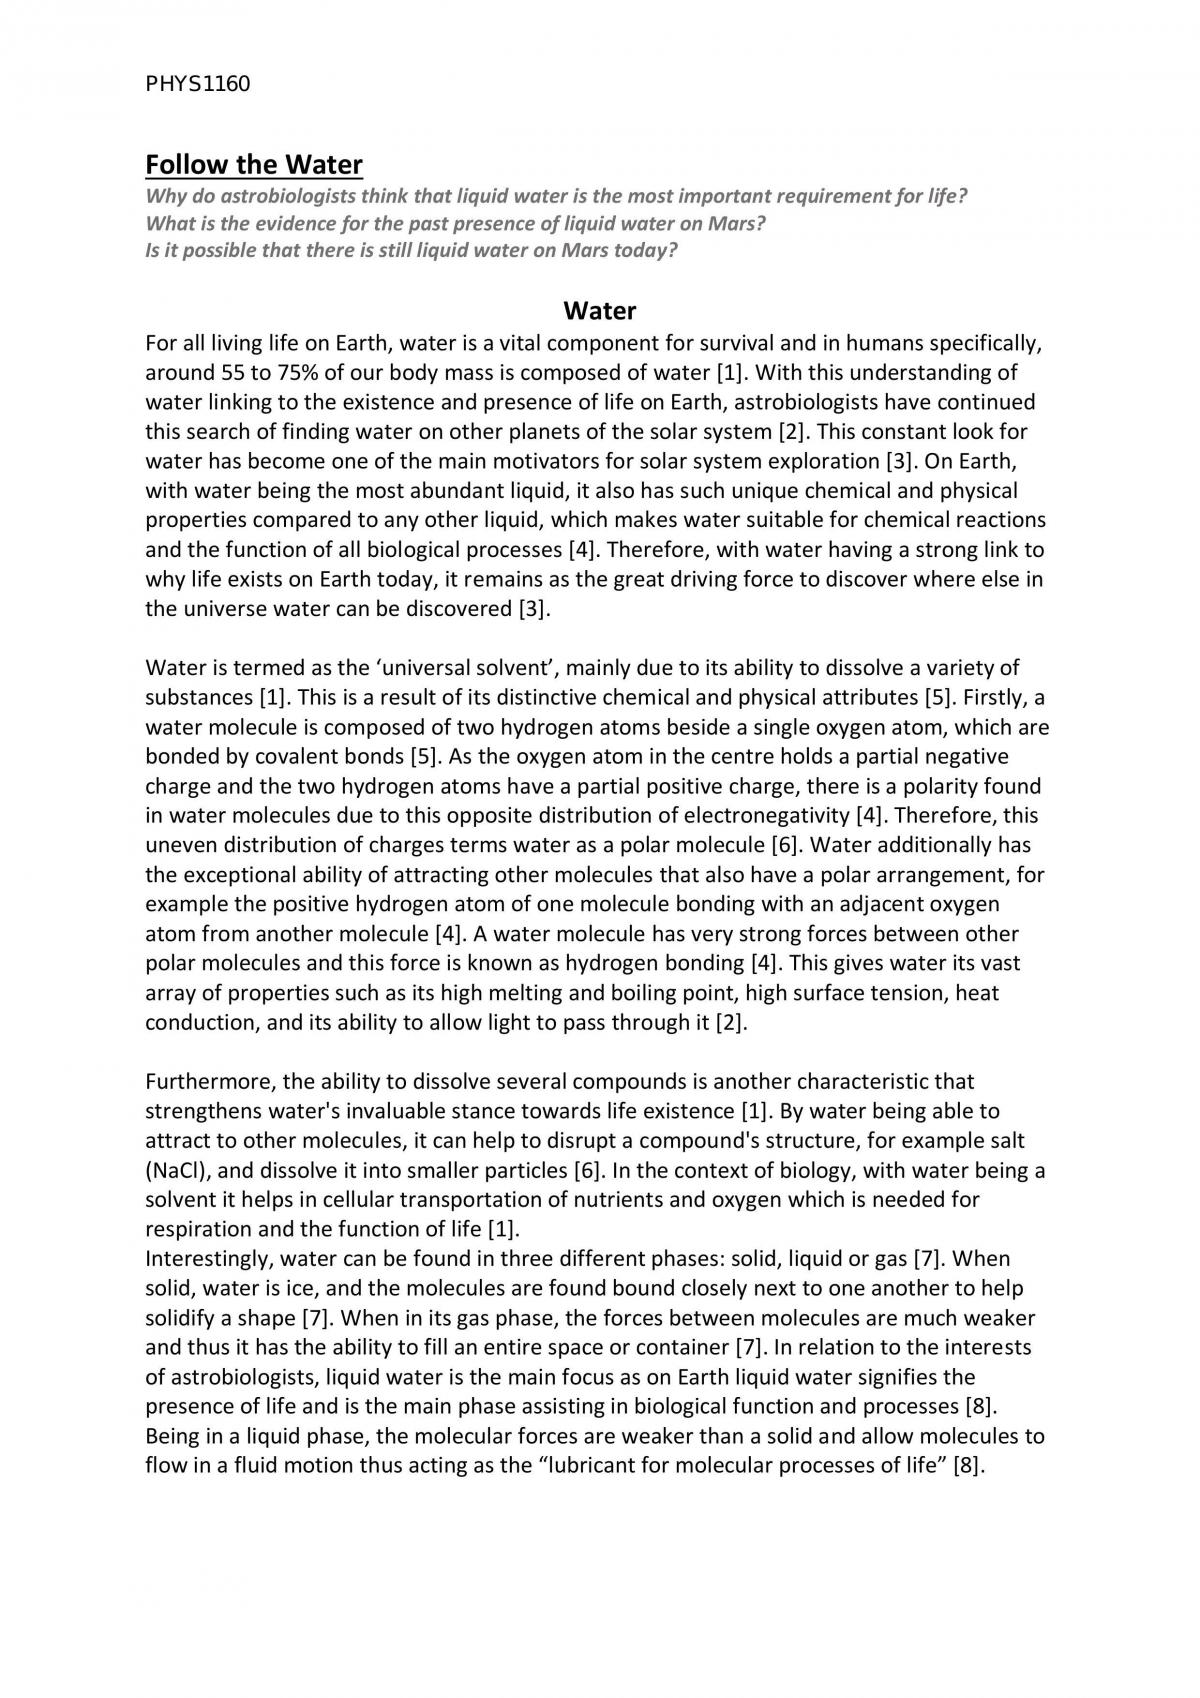 essay of water in english